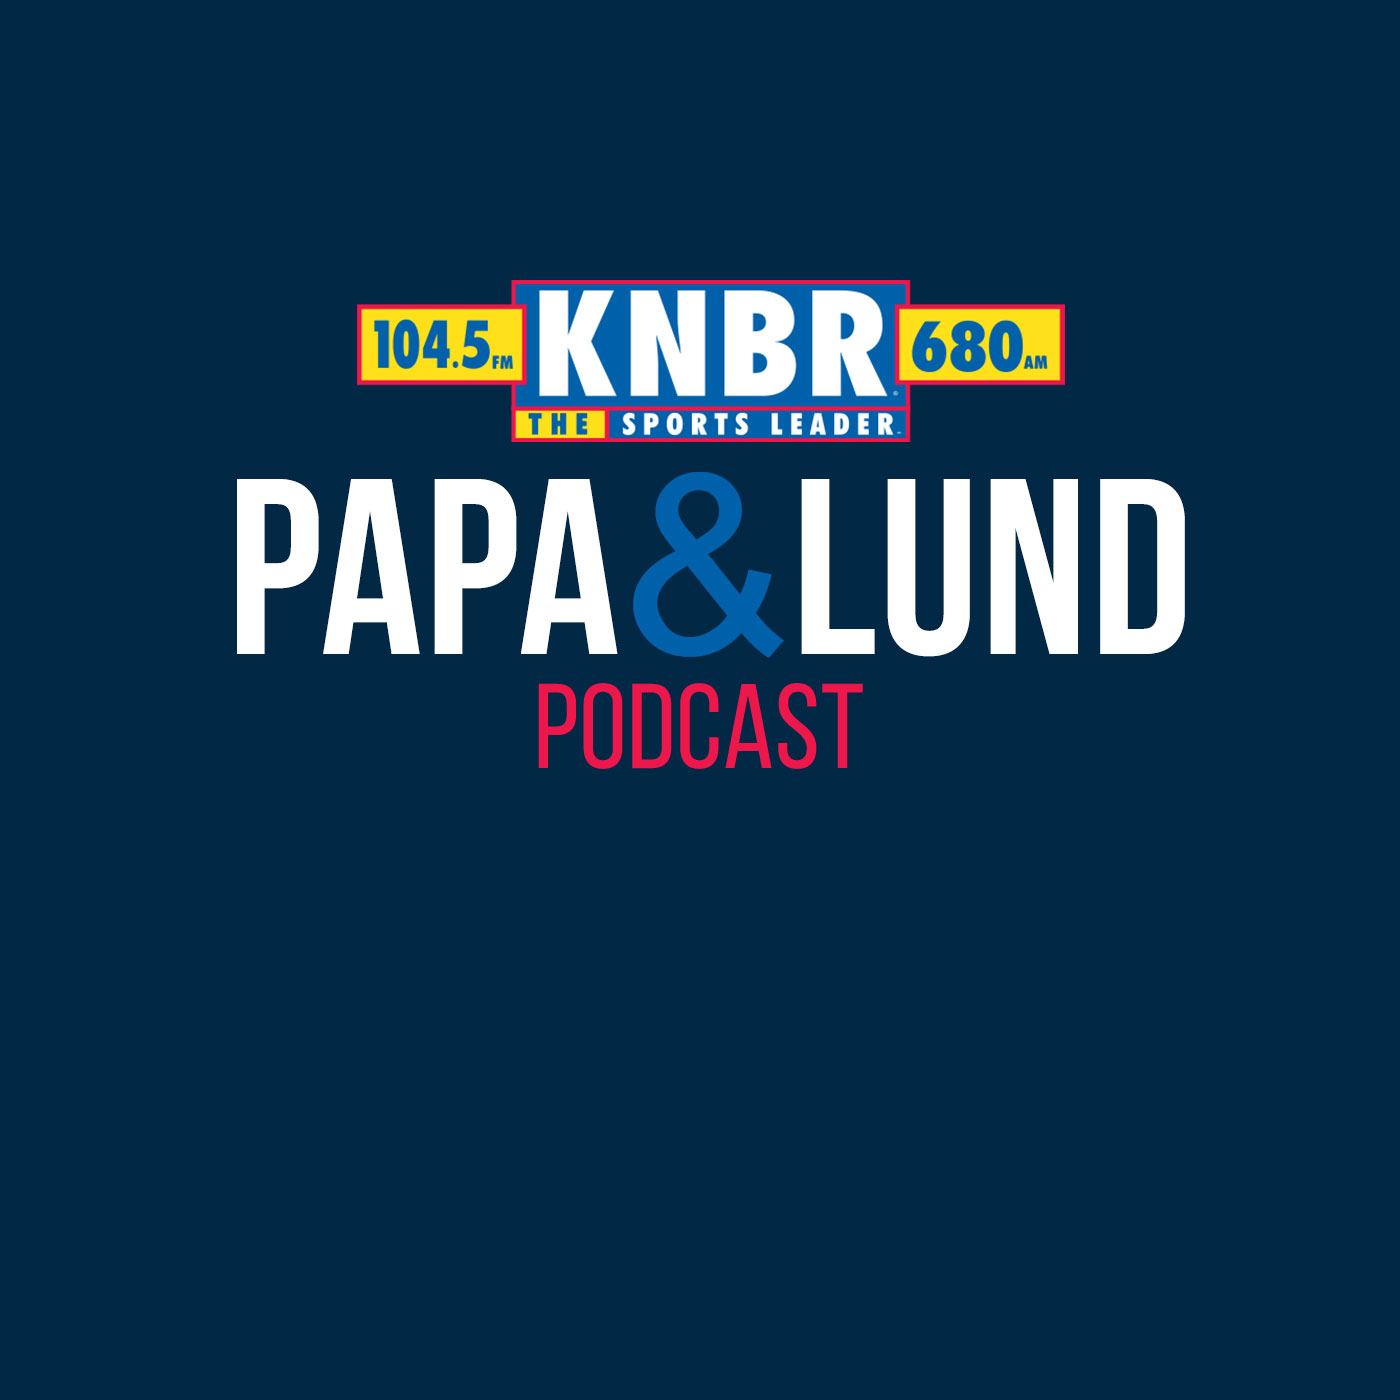 6-30 Eduardo Perez joins Papa & Lund to talk Giants, the upcoming series in New York, and the possible San Francisco All-Stars